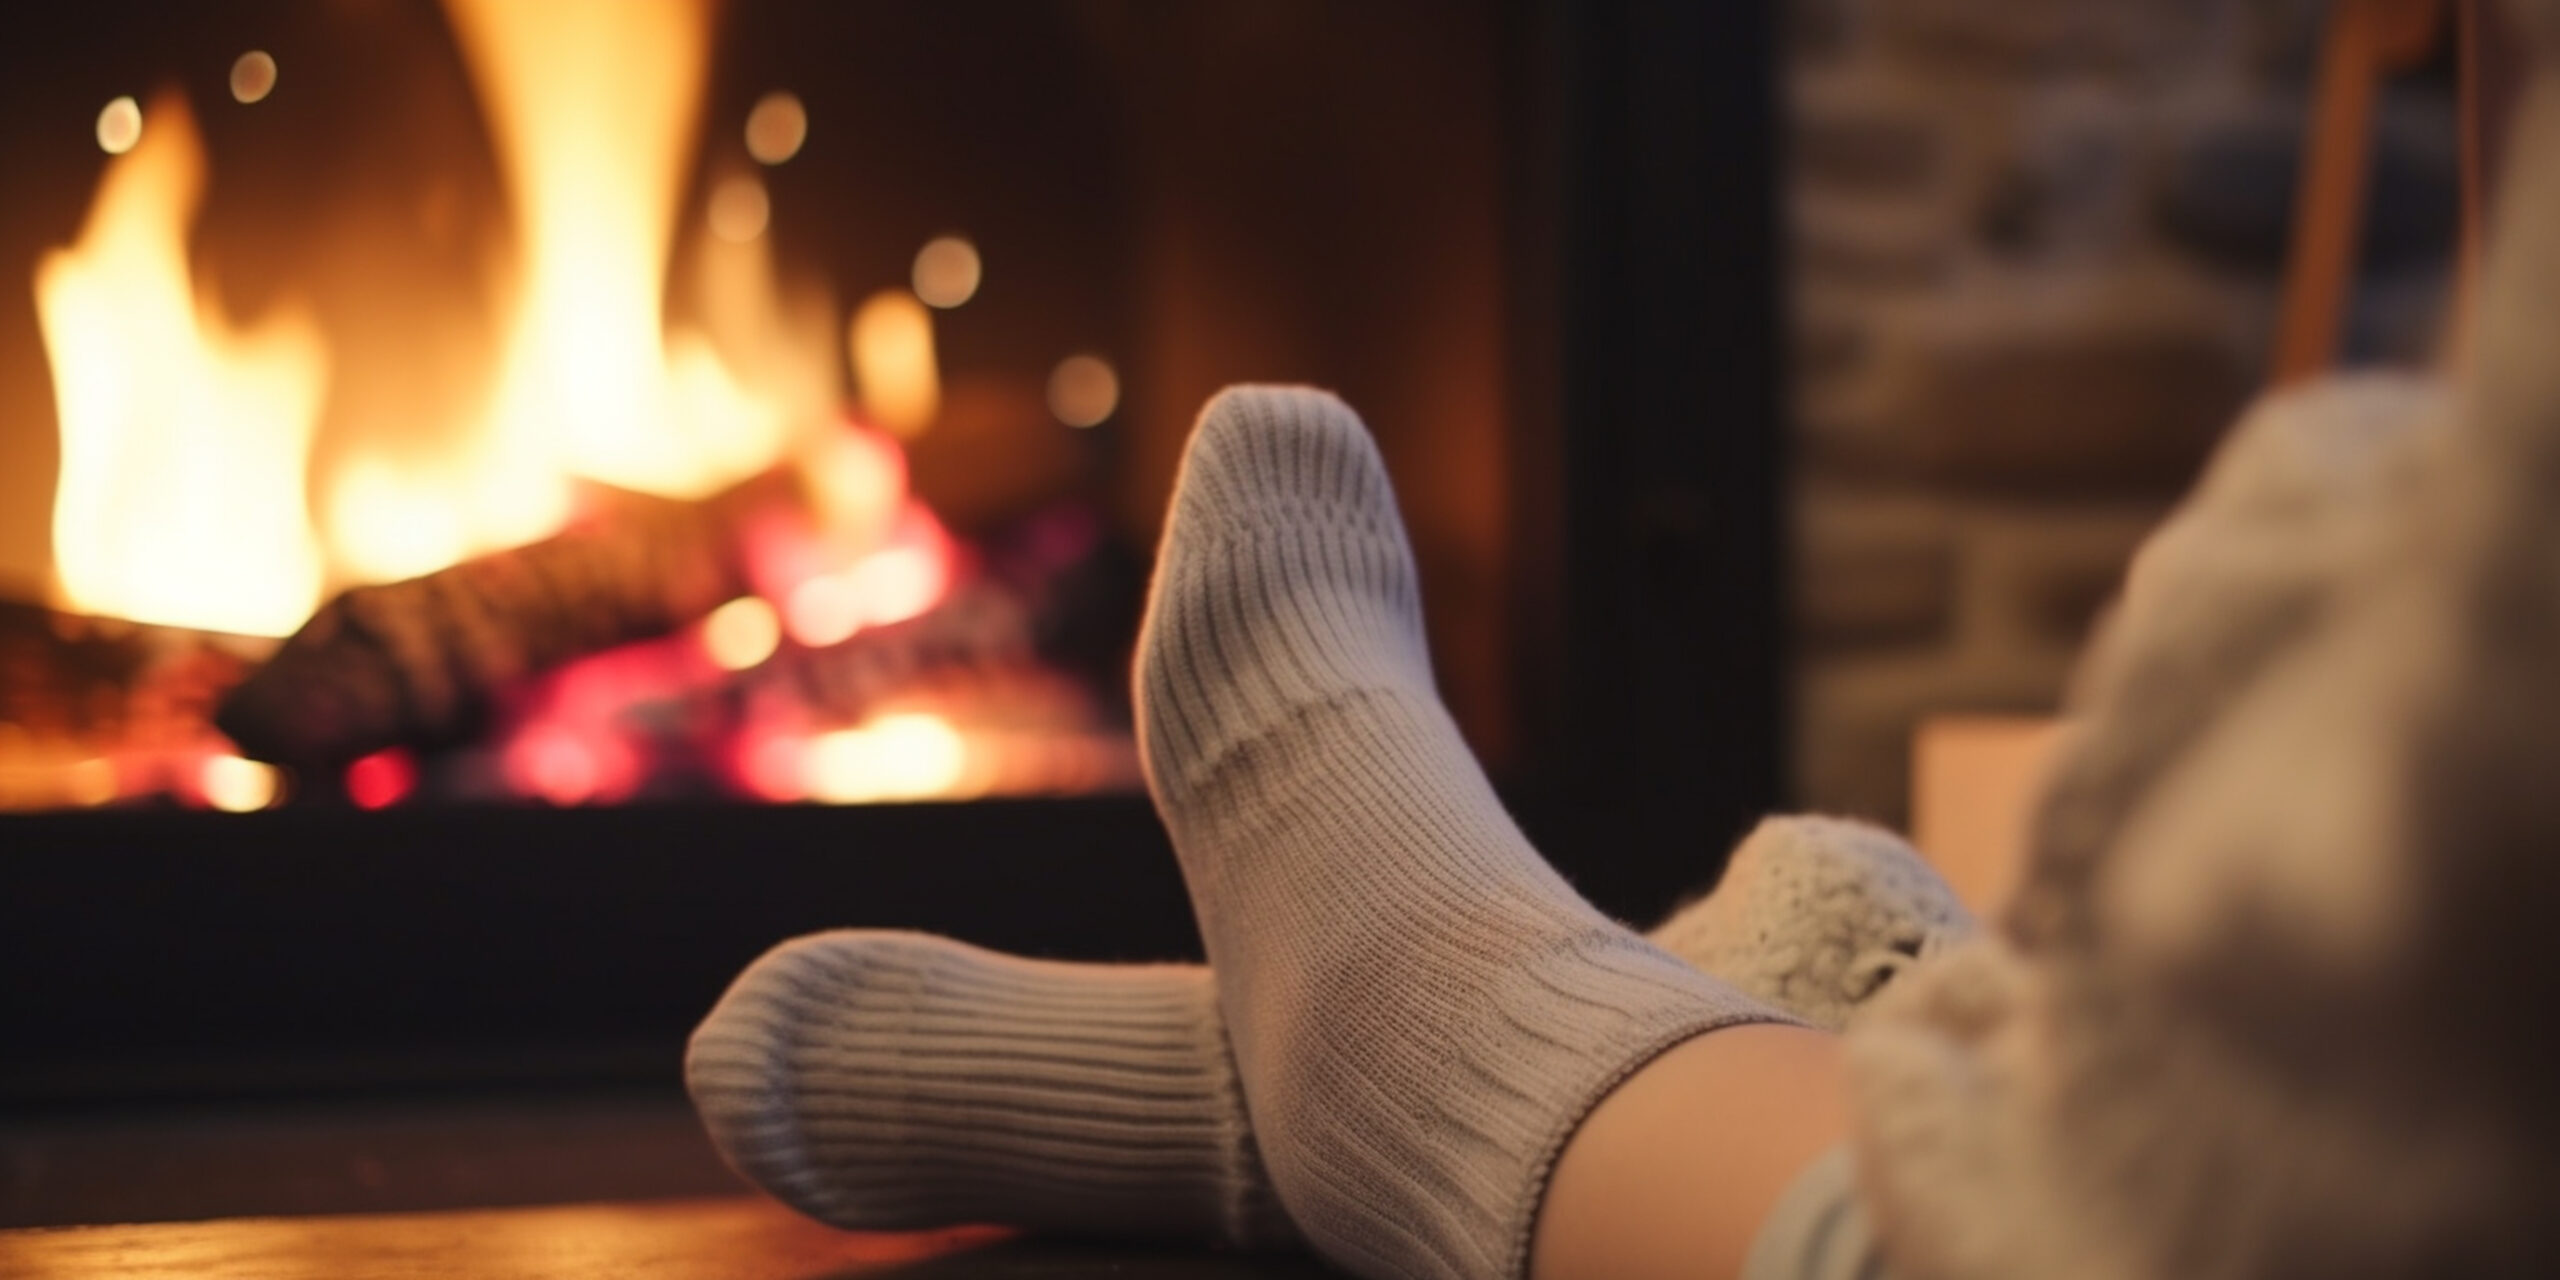 Batt Insulation Contractor New York - A Woman's Feet Showing, Relaxing in Front of the Fireplace